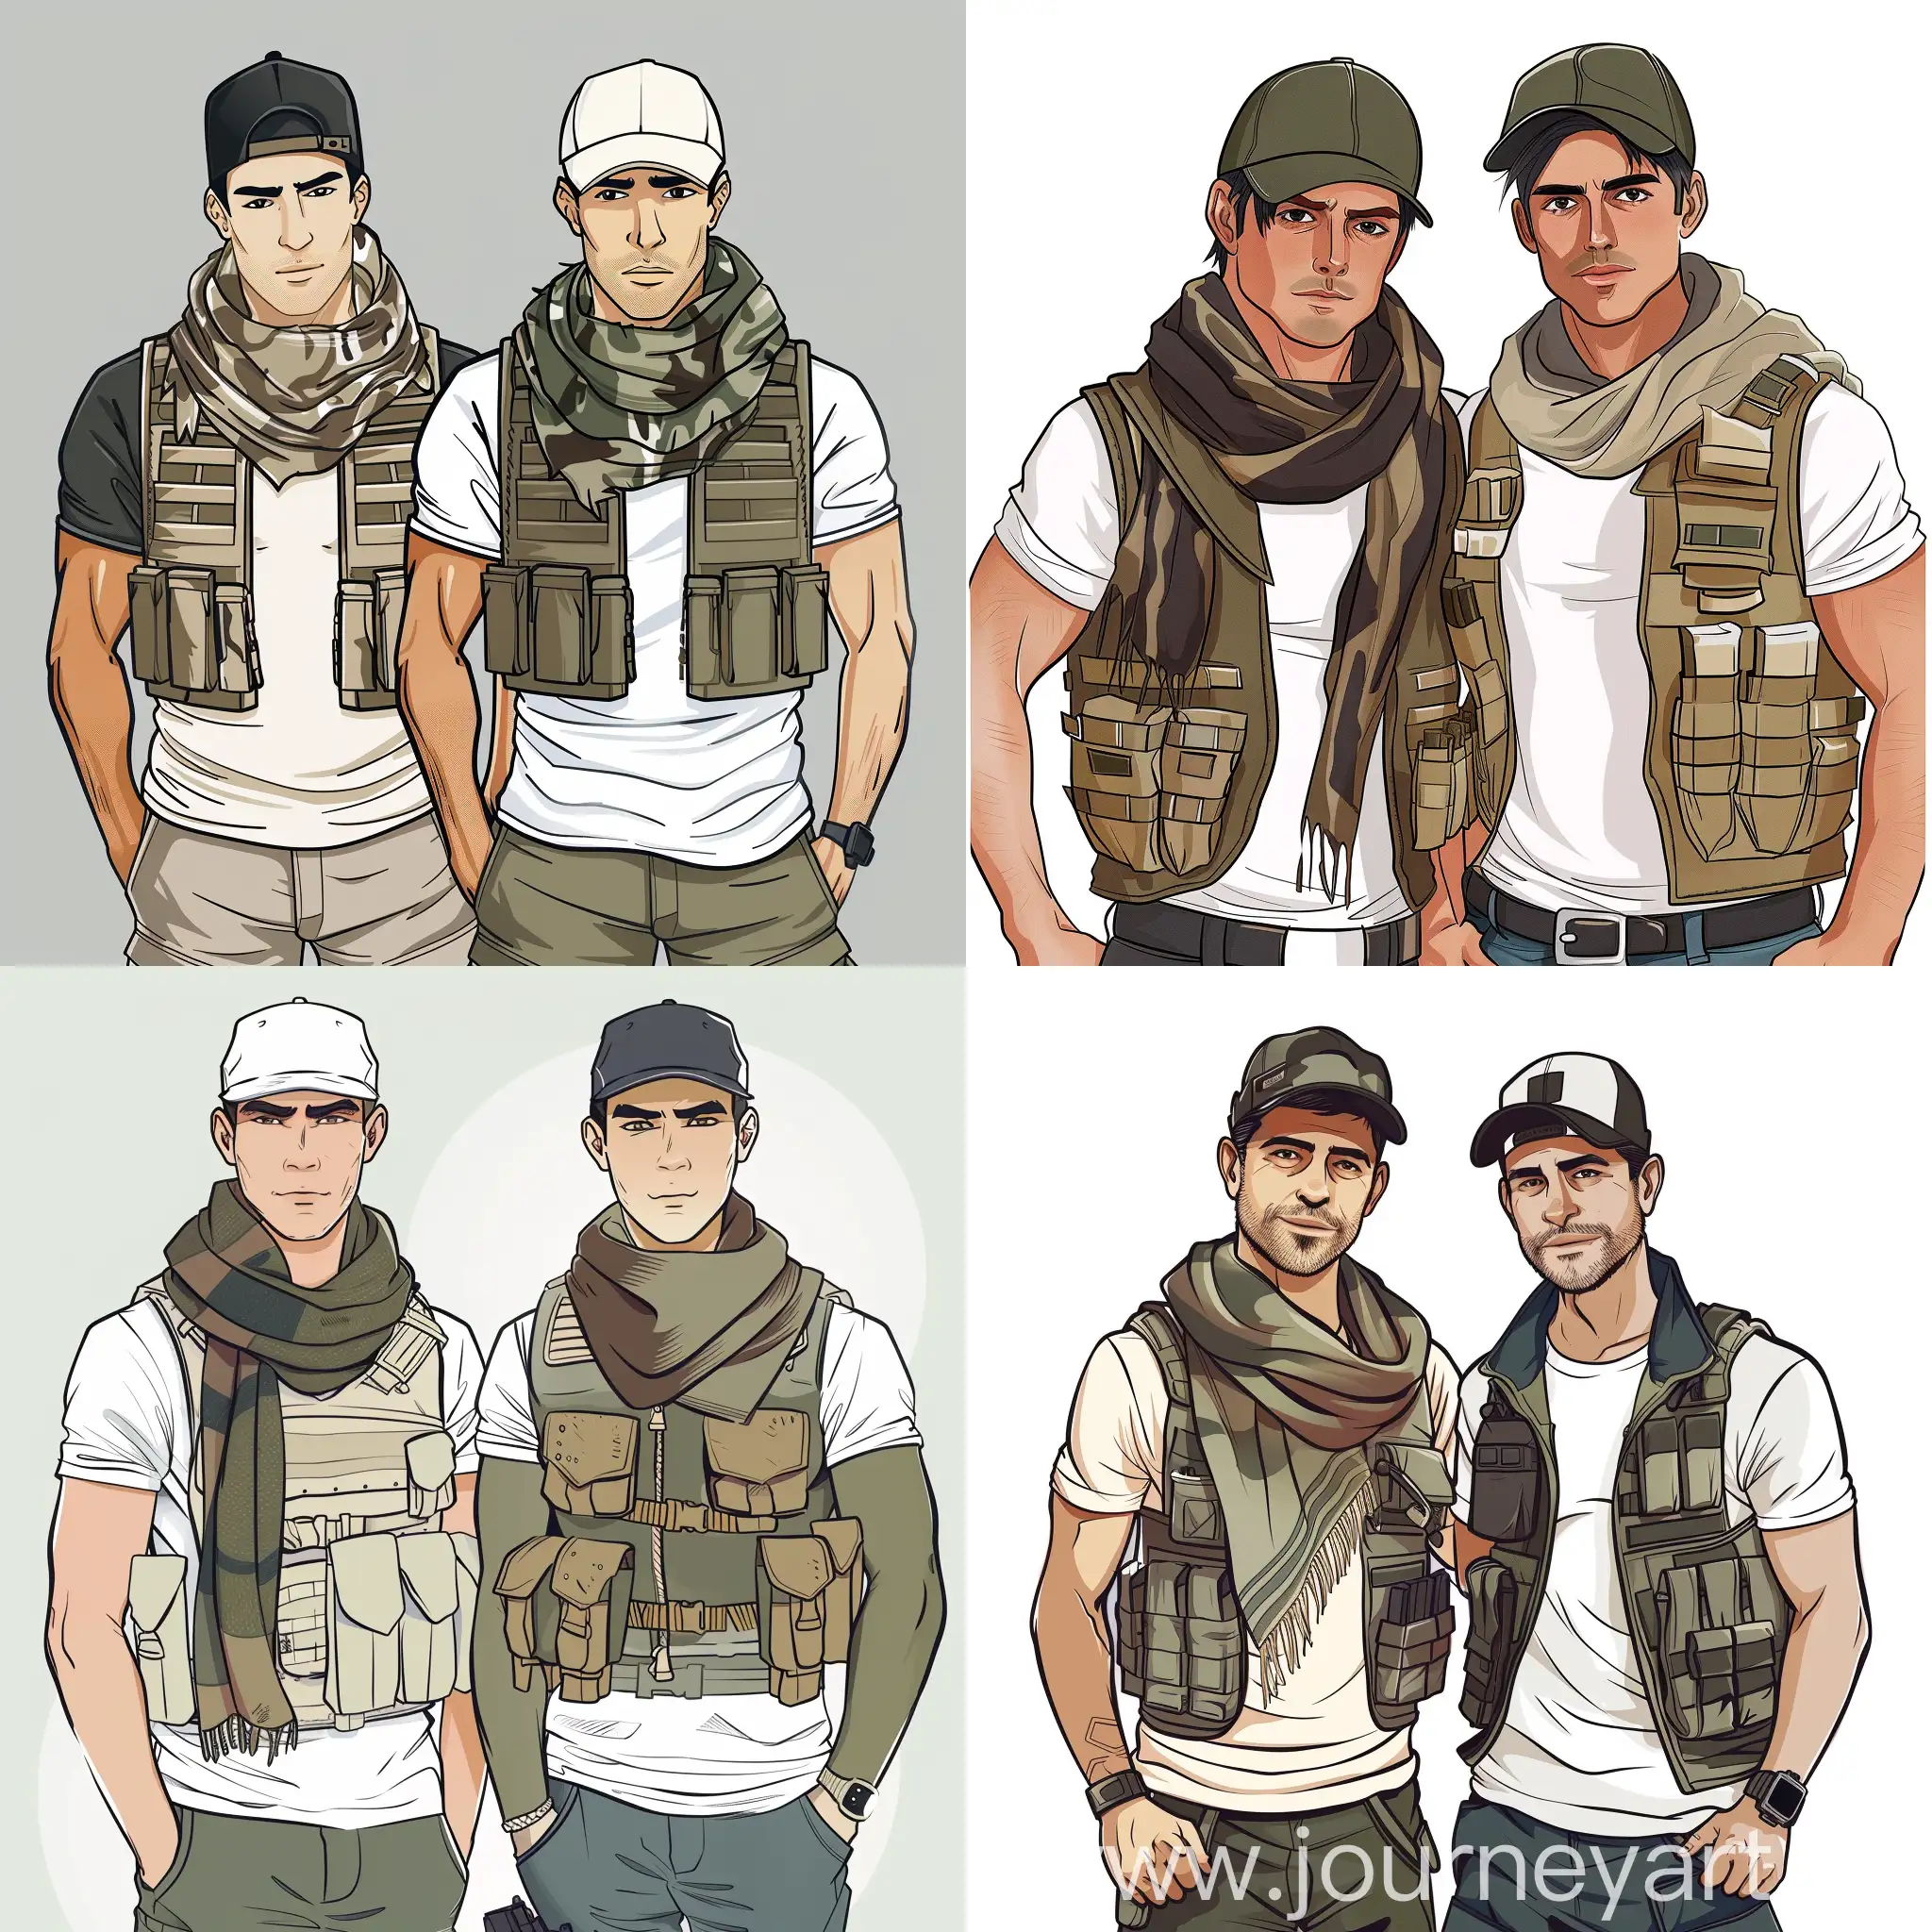 Adventure-Duo-in-Tactical-Gear-with-Colorful-Cartoon-Style